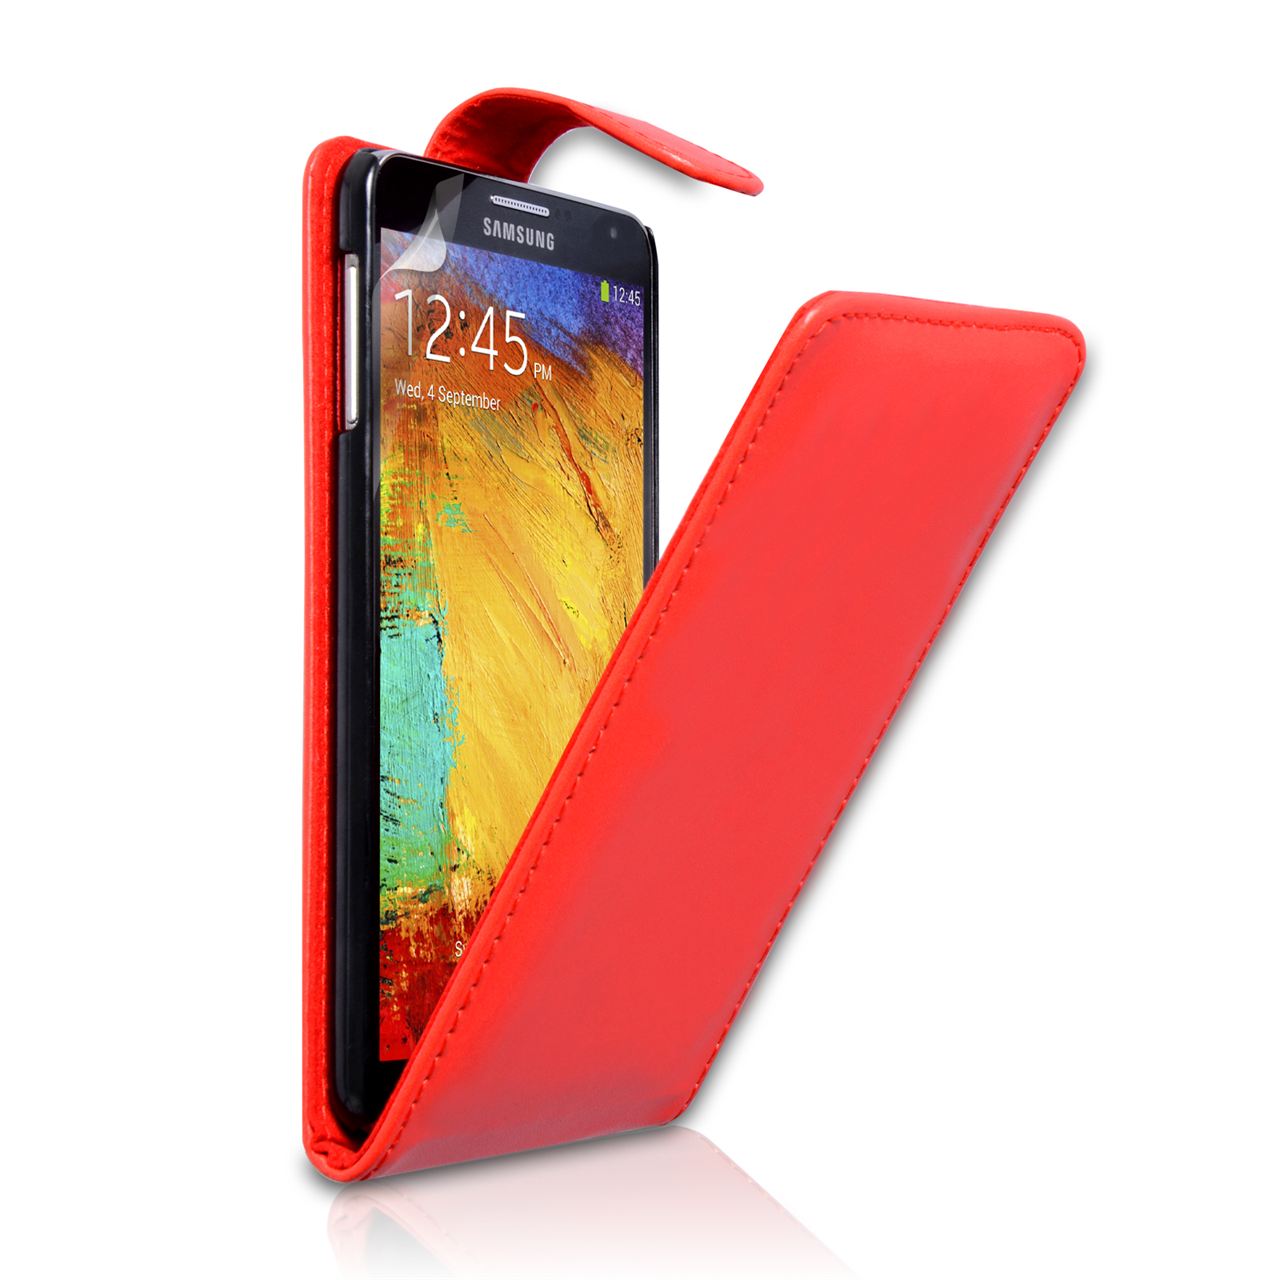 Samsung Galaxy Note 3 Cases | Mobile Madhouse